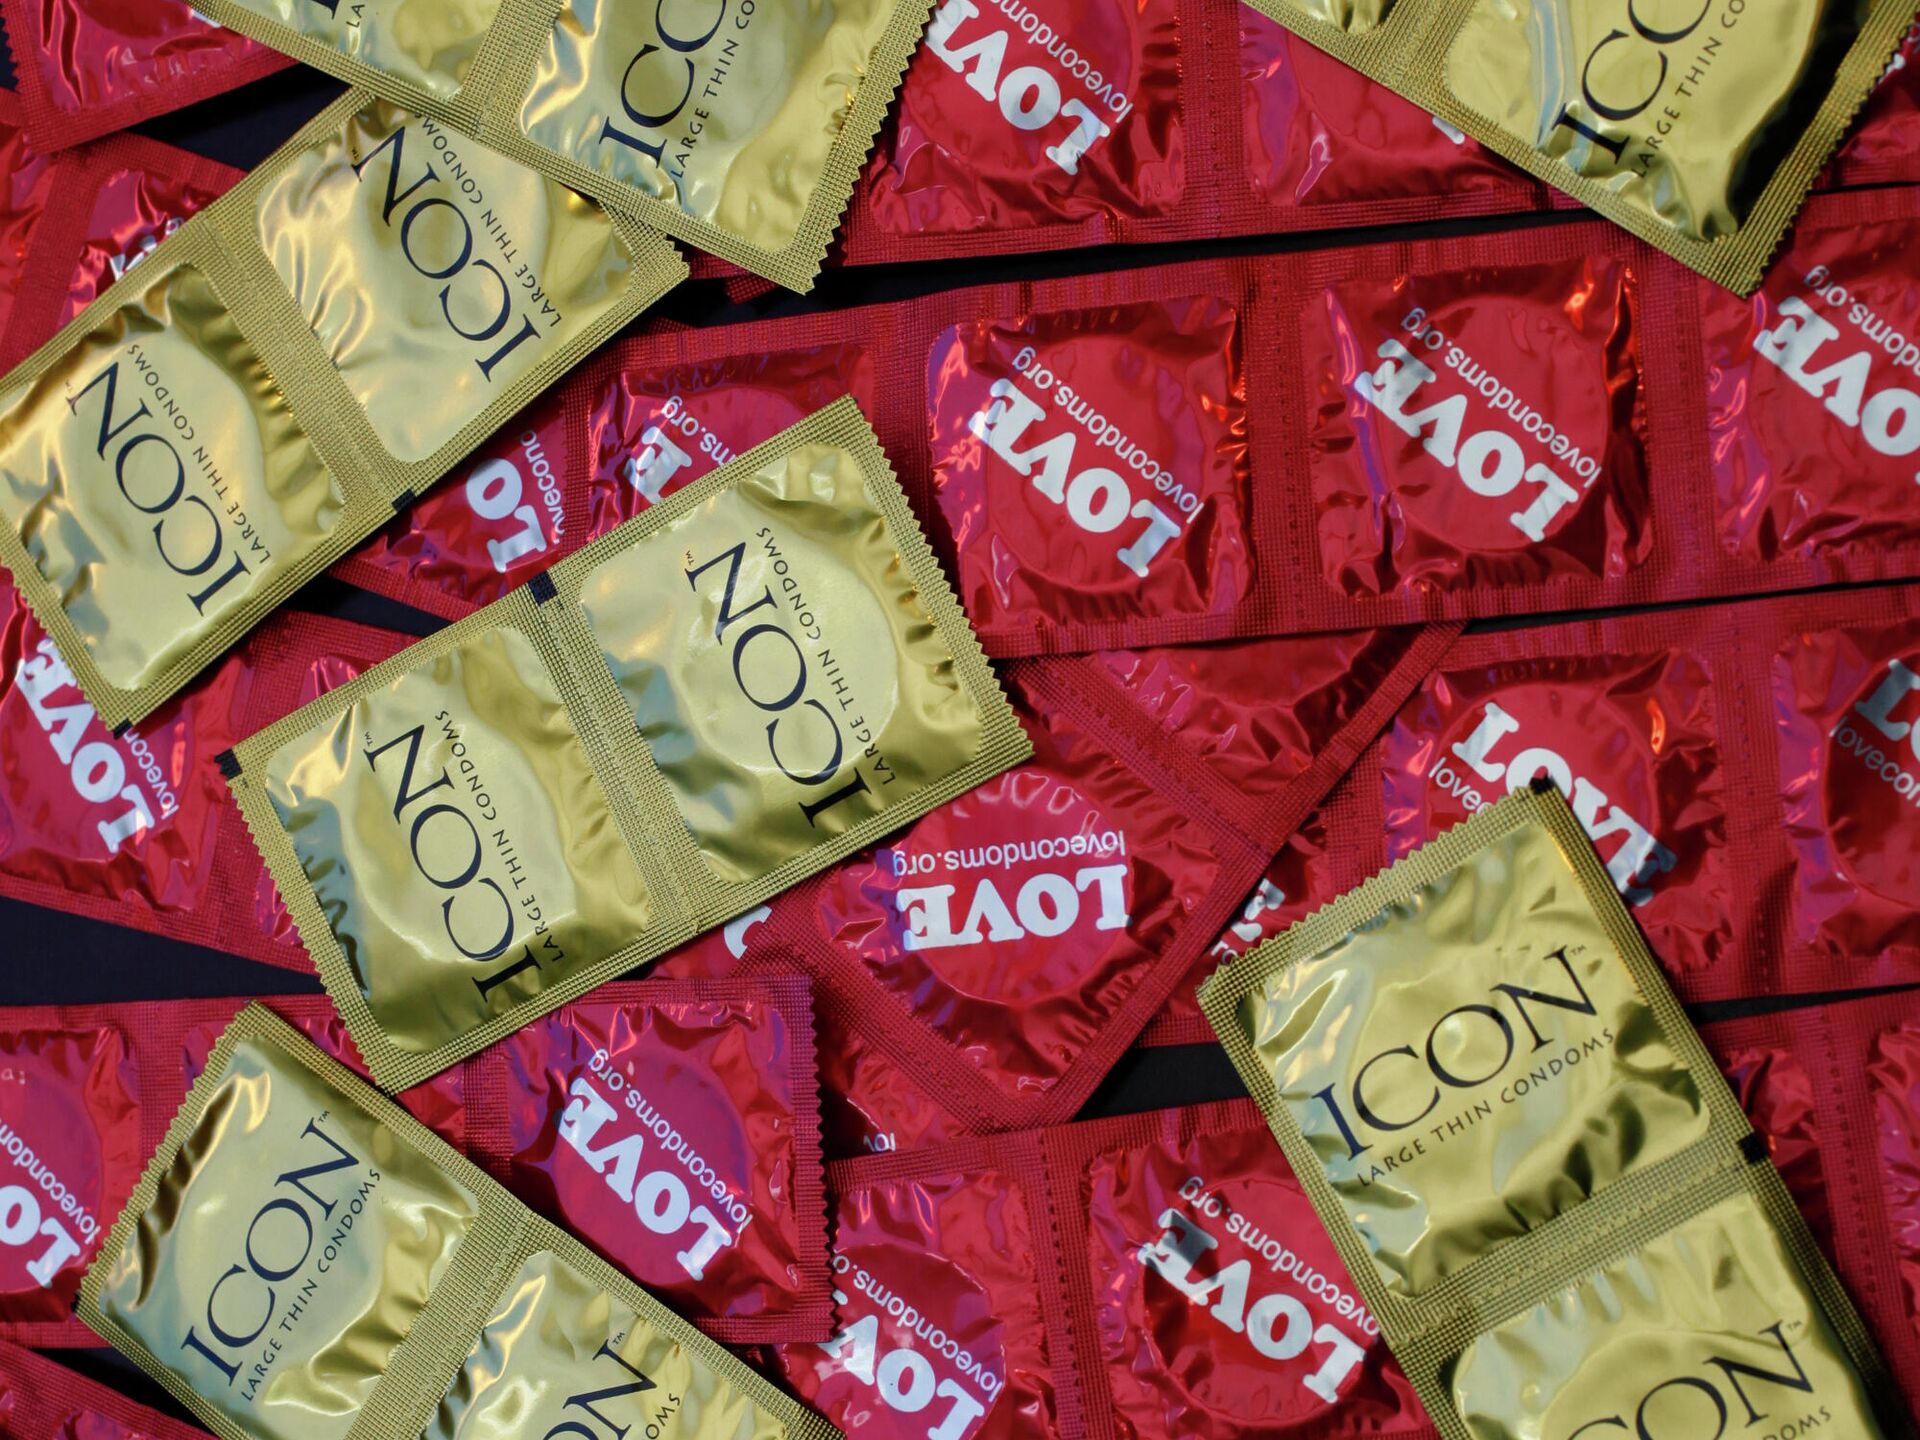 California Becomes First Us State To Prohibit Mid Intercourse Condom